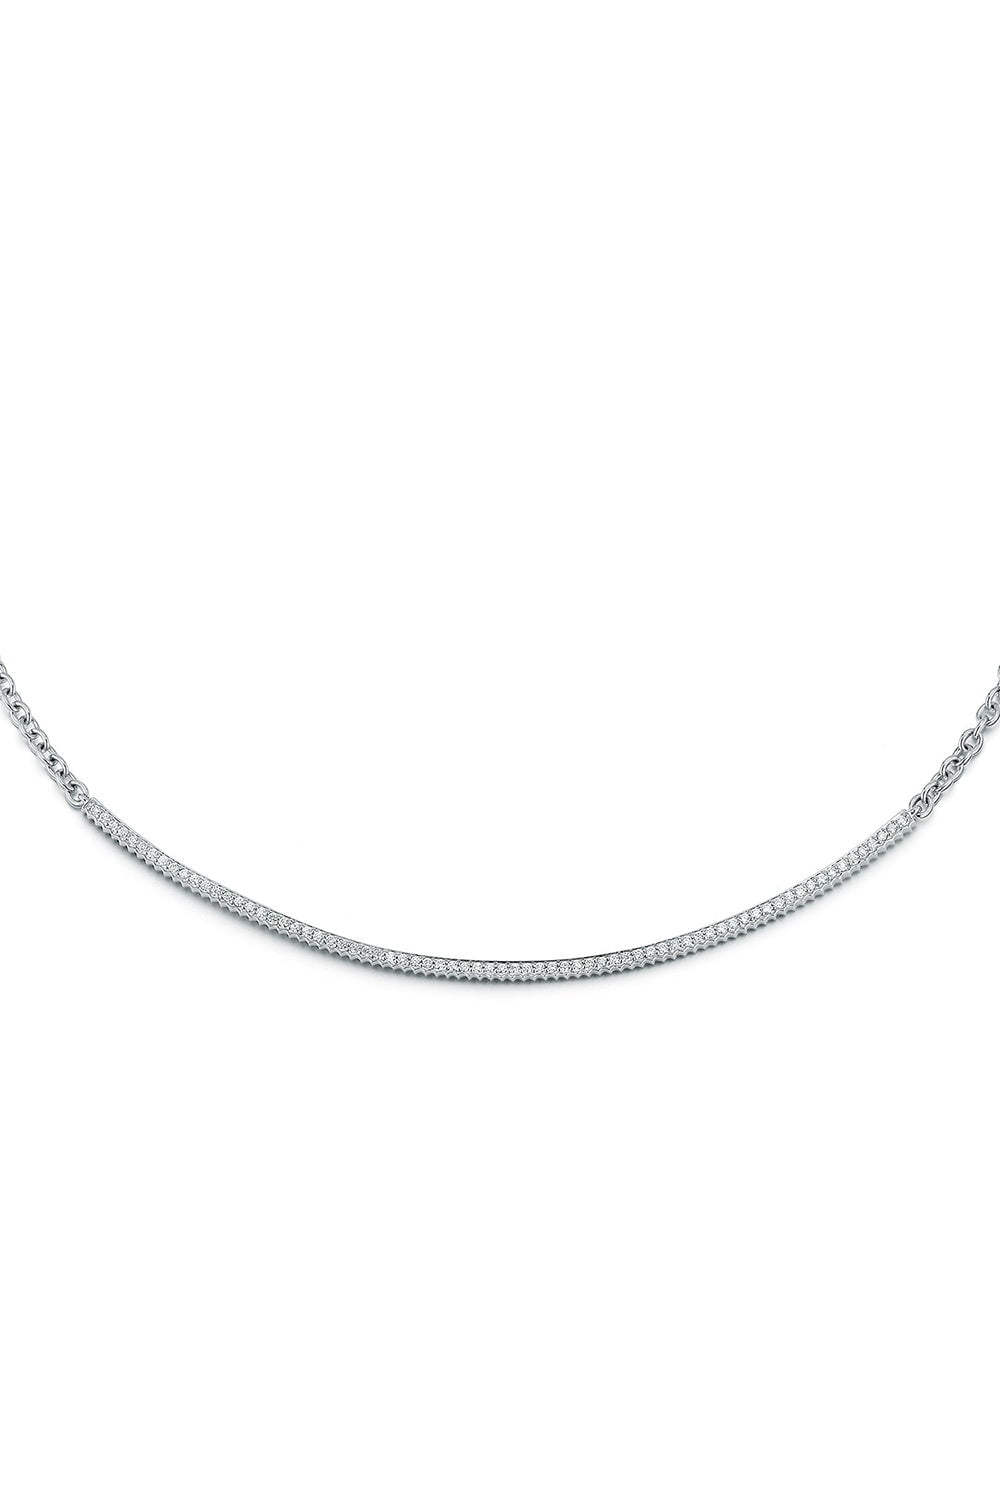 WALTERS FAITH-Clive Fluted Bar Necklace-WHITE GOLD